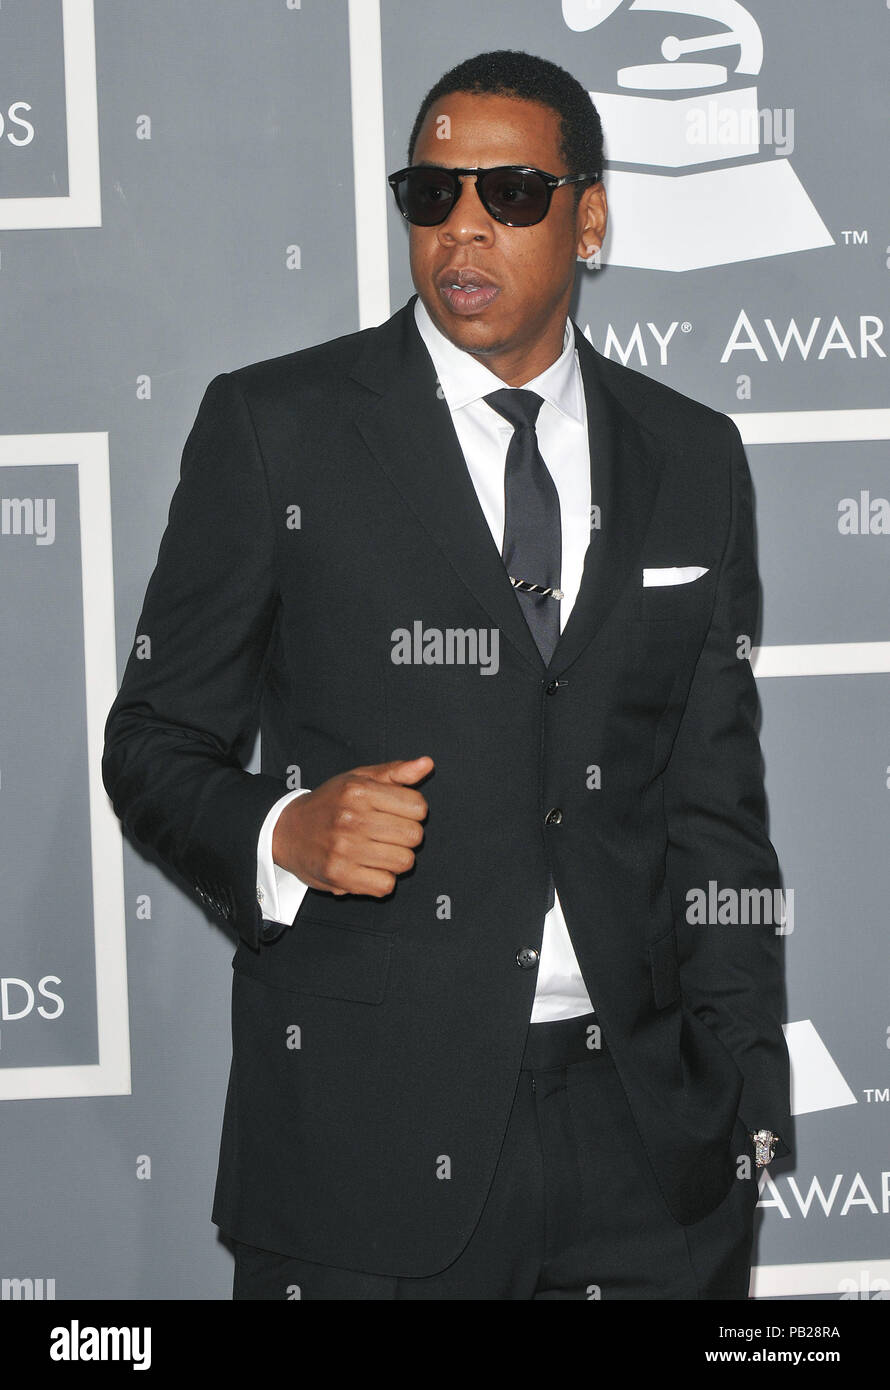 Jay-Z: Pics Of The Rapper – Hollywood Life